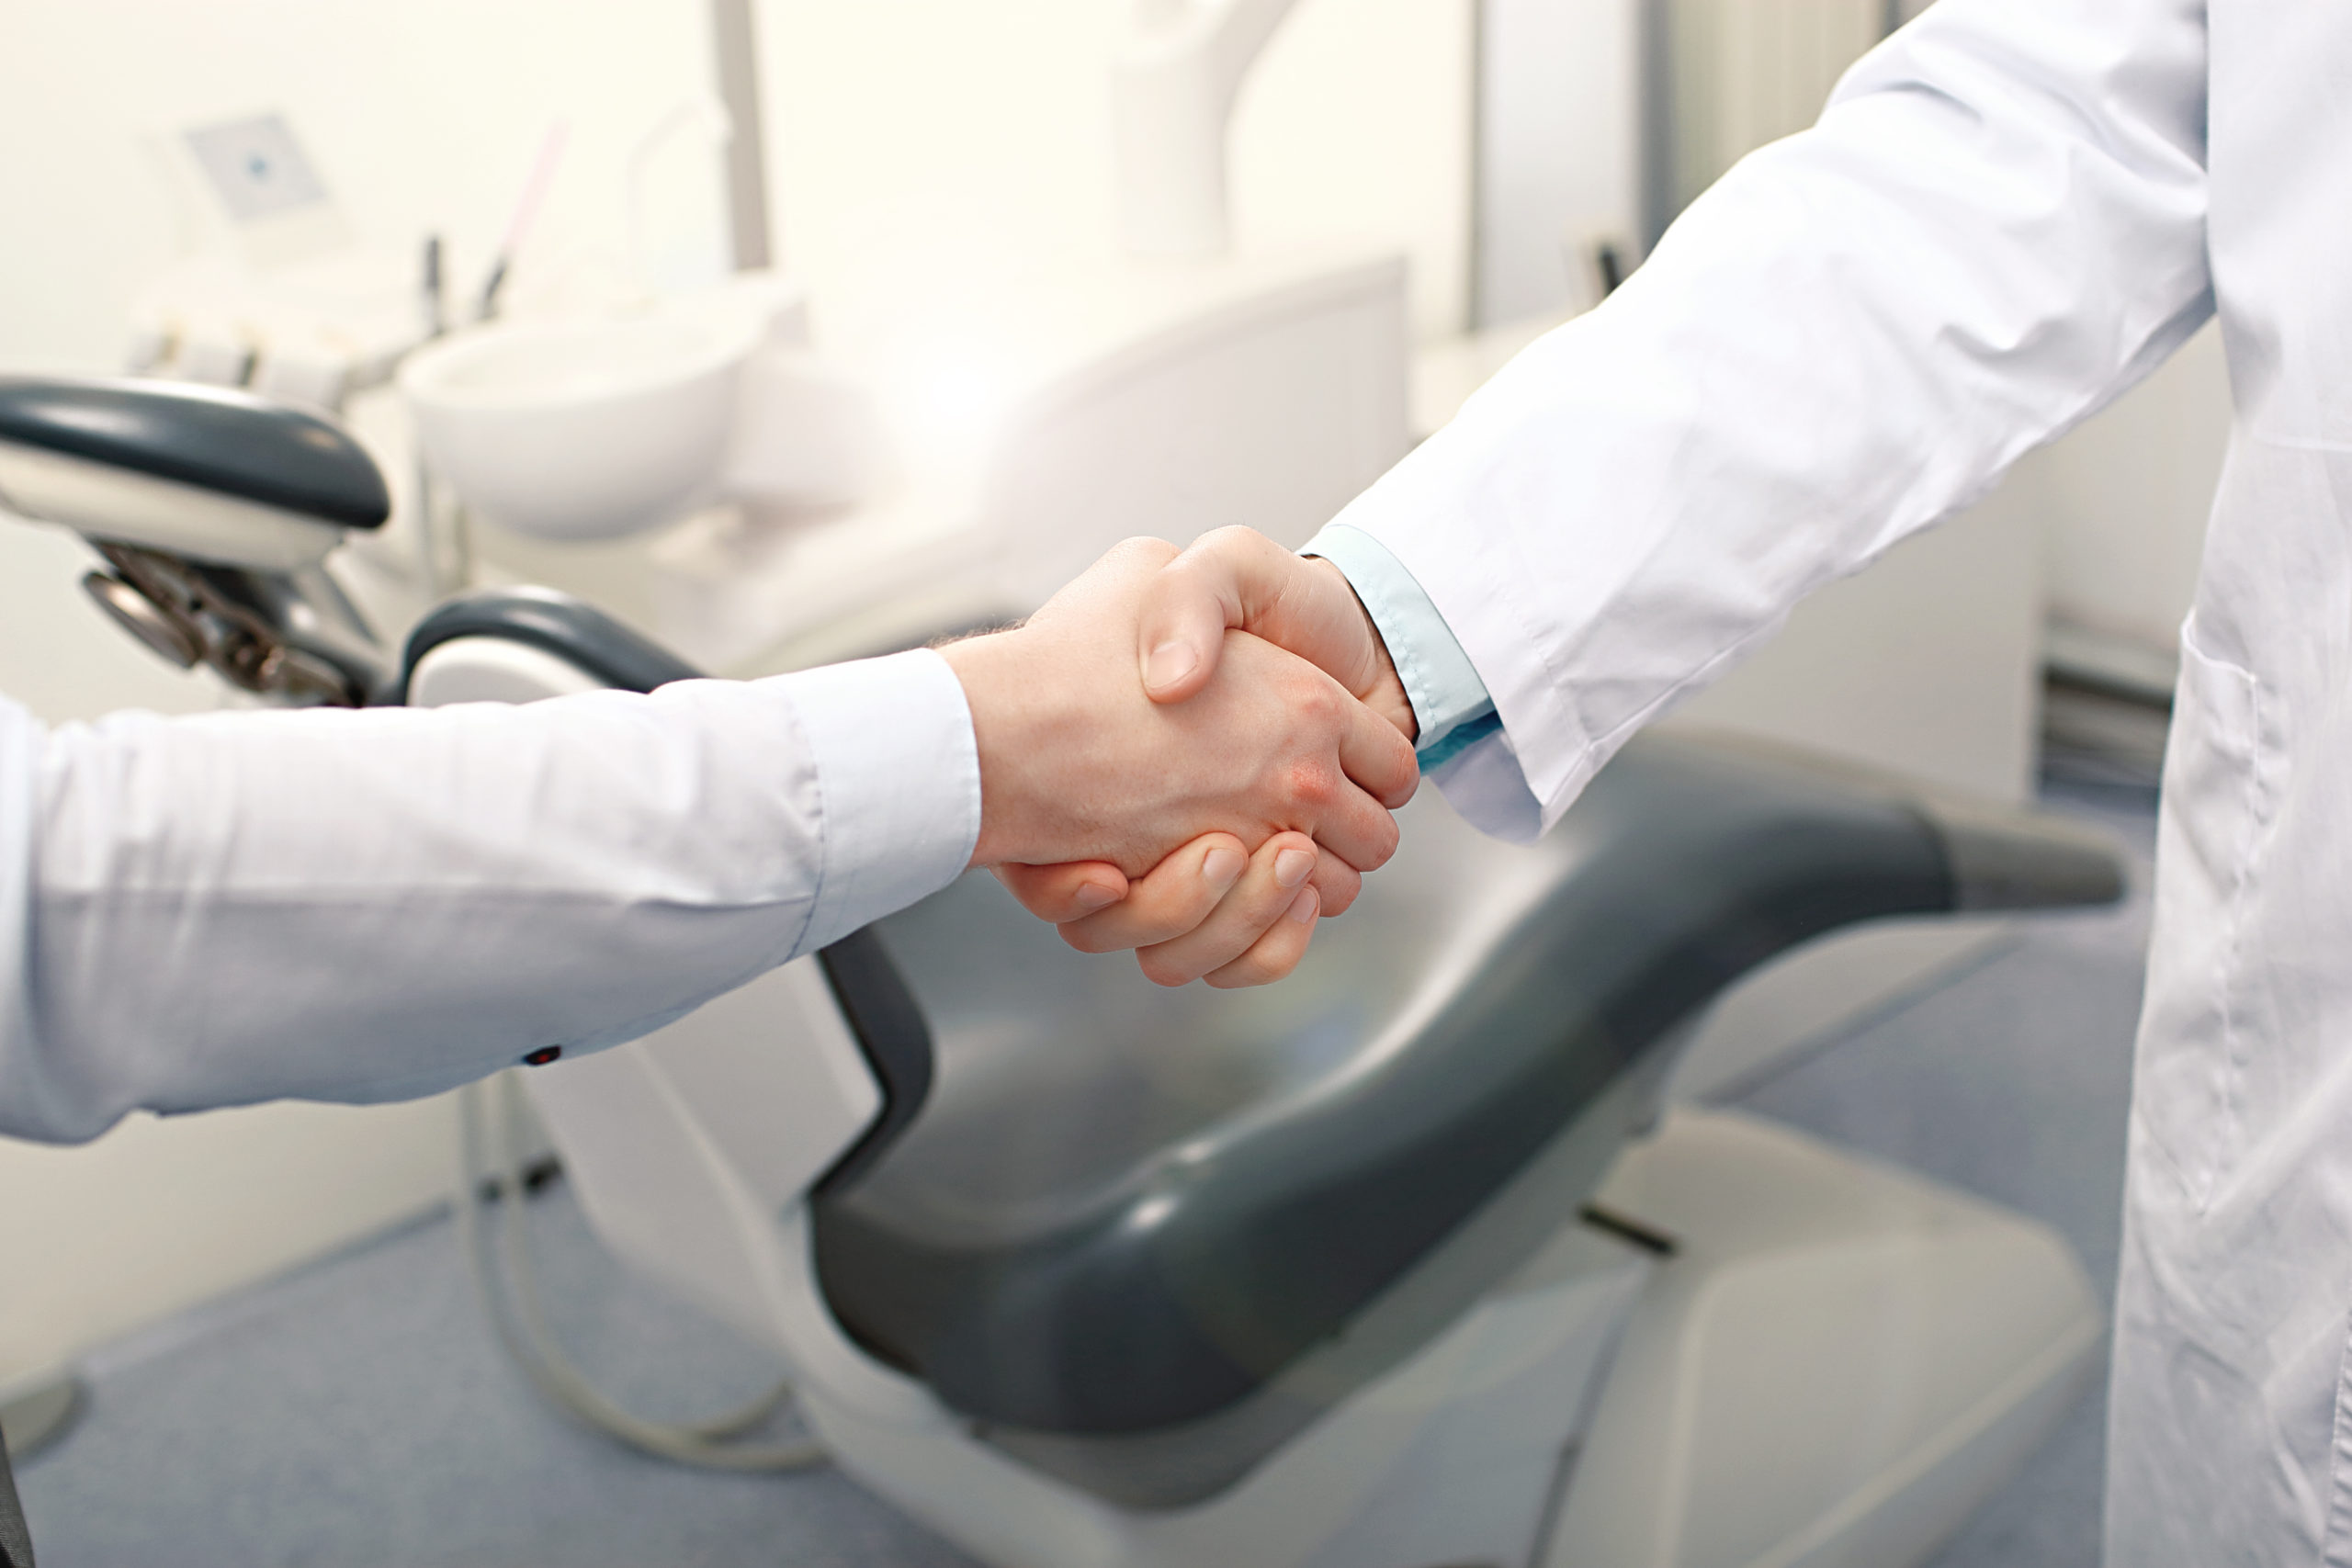 Dentist shaking hands in front of dental chair